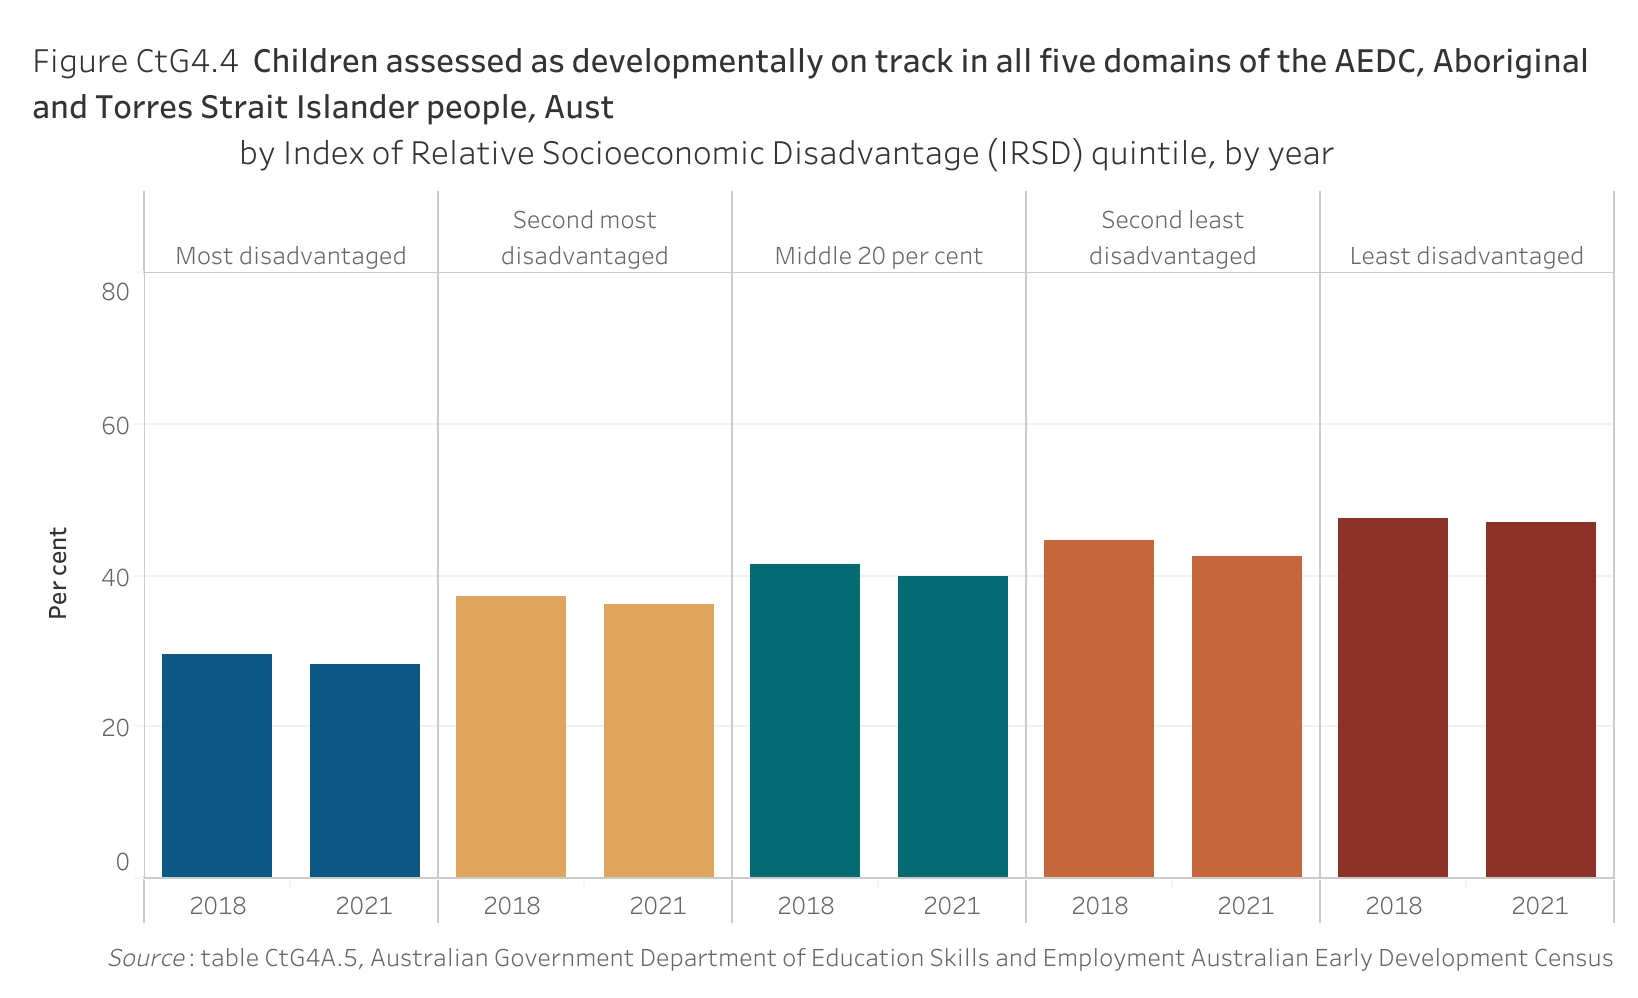 Figure CtG4.4 shows children assessed as developmentally on track in all five domains of the Australian Early Development Census, Aboriginal and Torres Strait Islander people, Australia, by Index of Relative Socioeconomic Disadvantage quintile, by year. More details can be found within the text near this image.